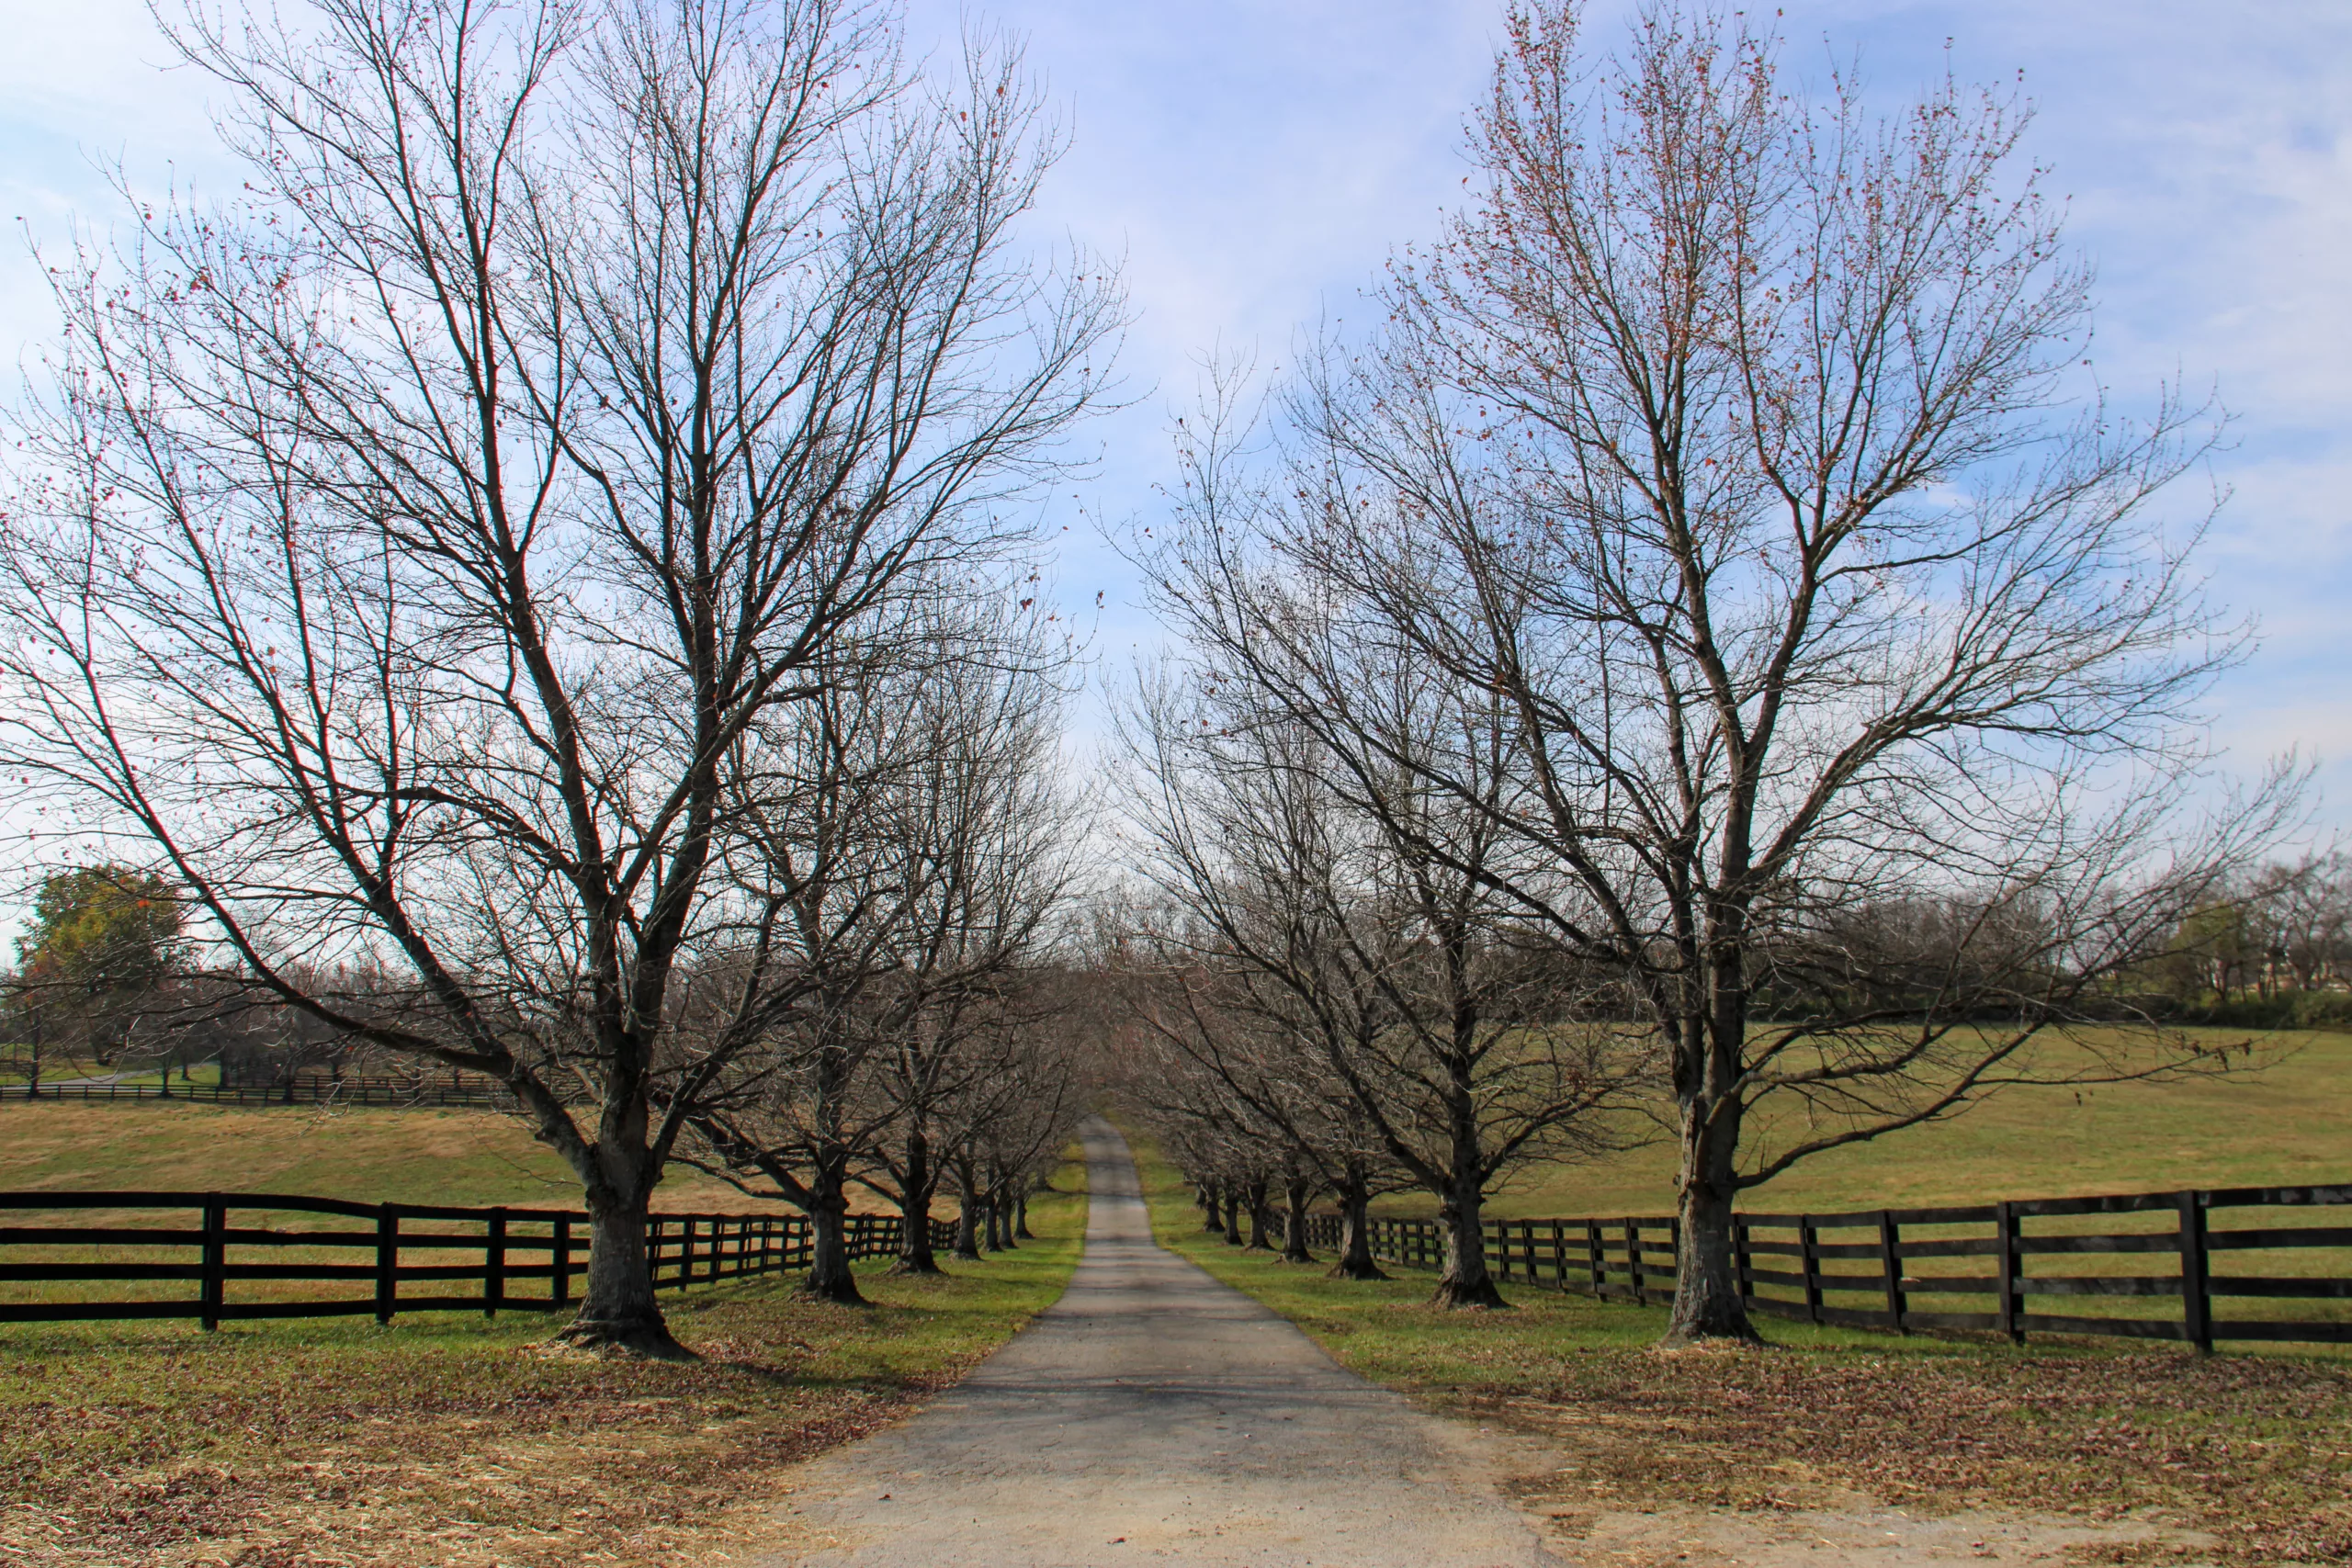 New gated subdivision planned at horse farm near intersection of Tates Creek and Brannon Roads